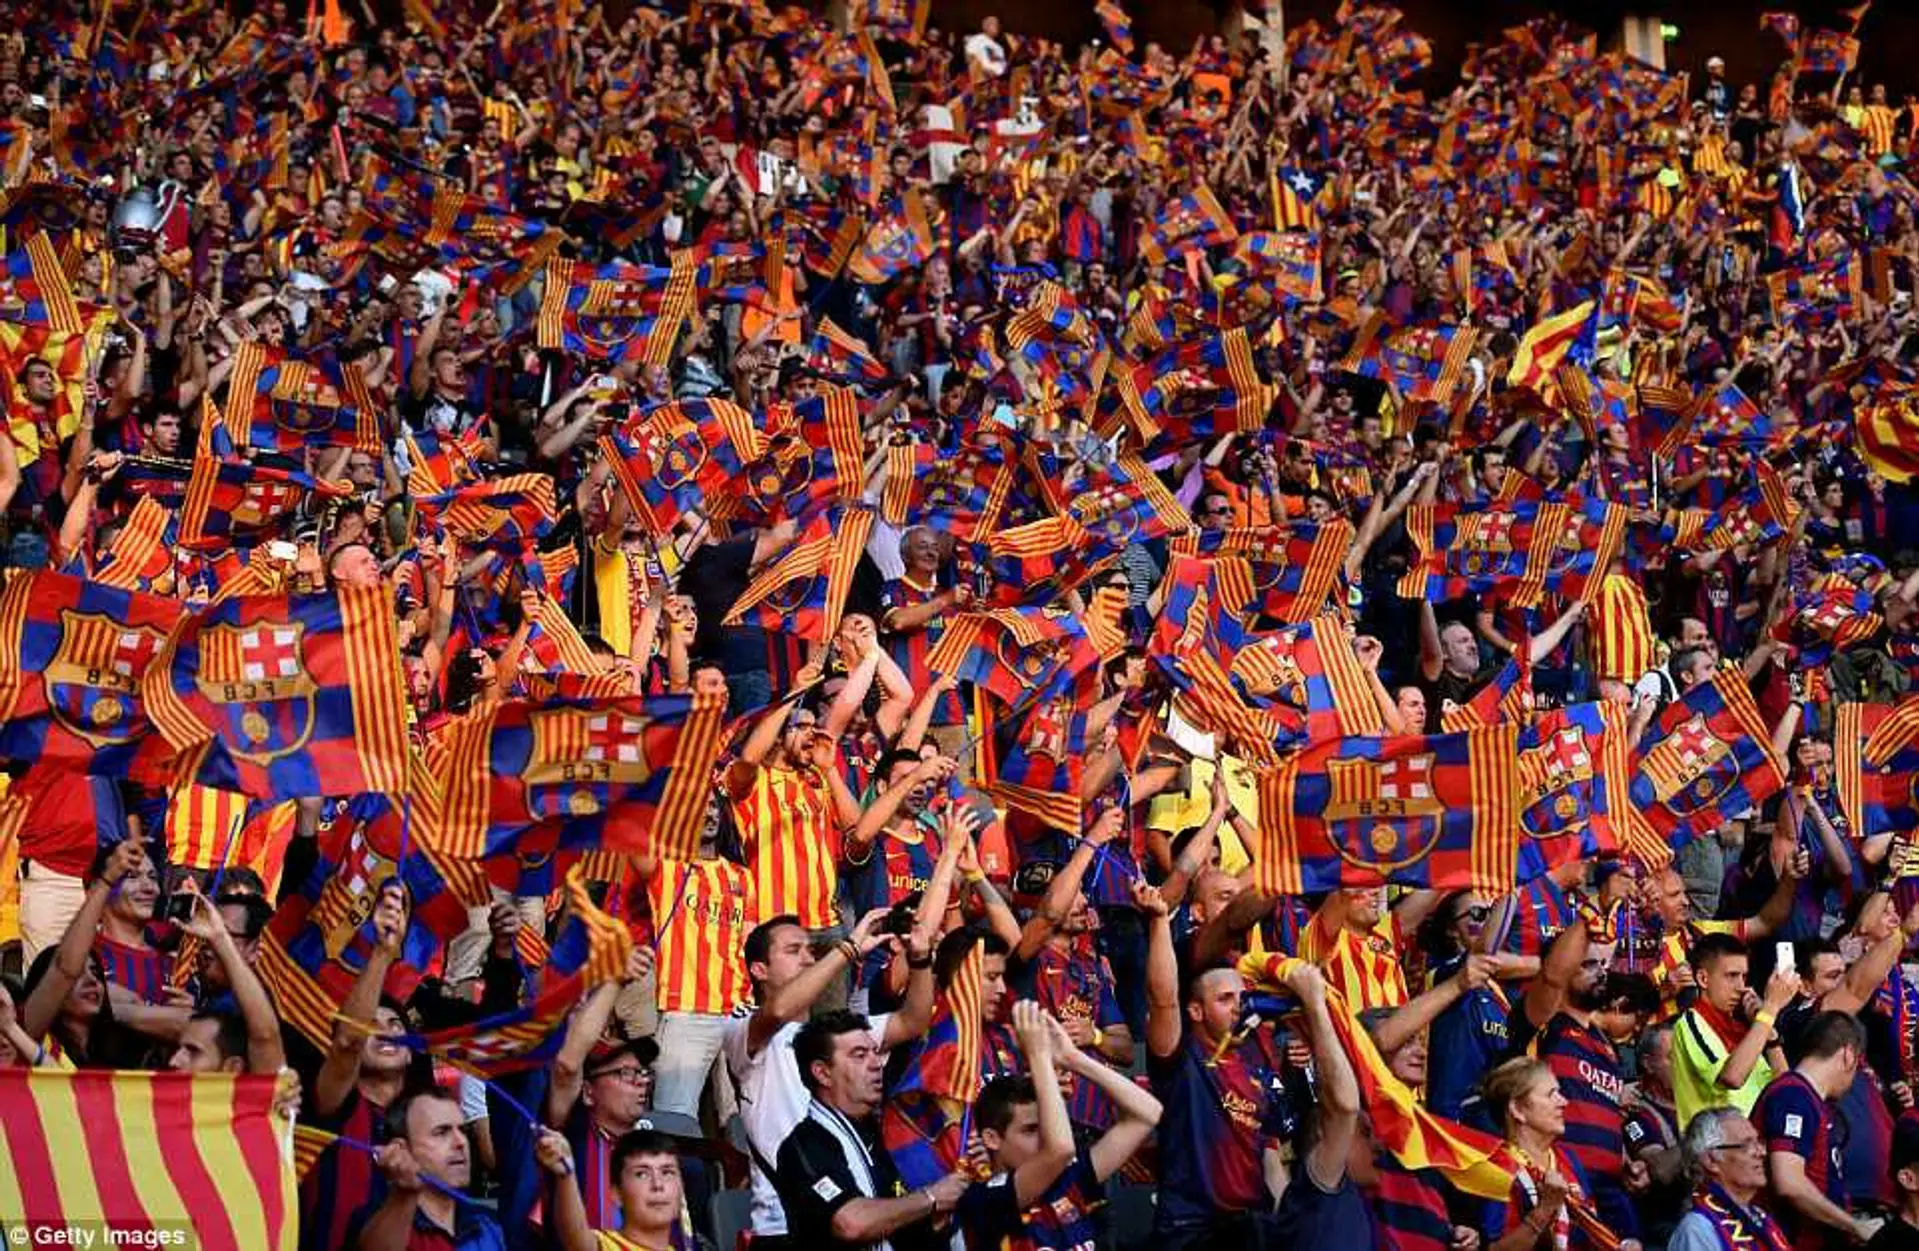 Changes Needed at Camp Nou